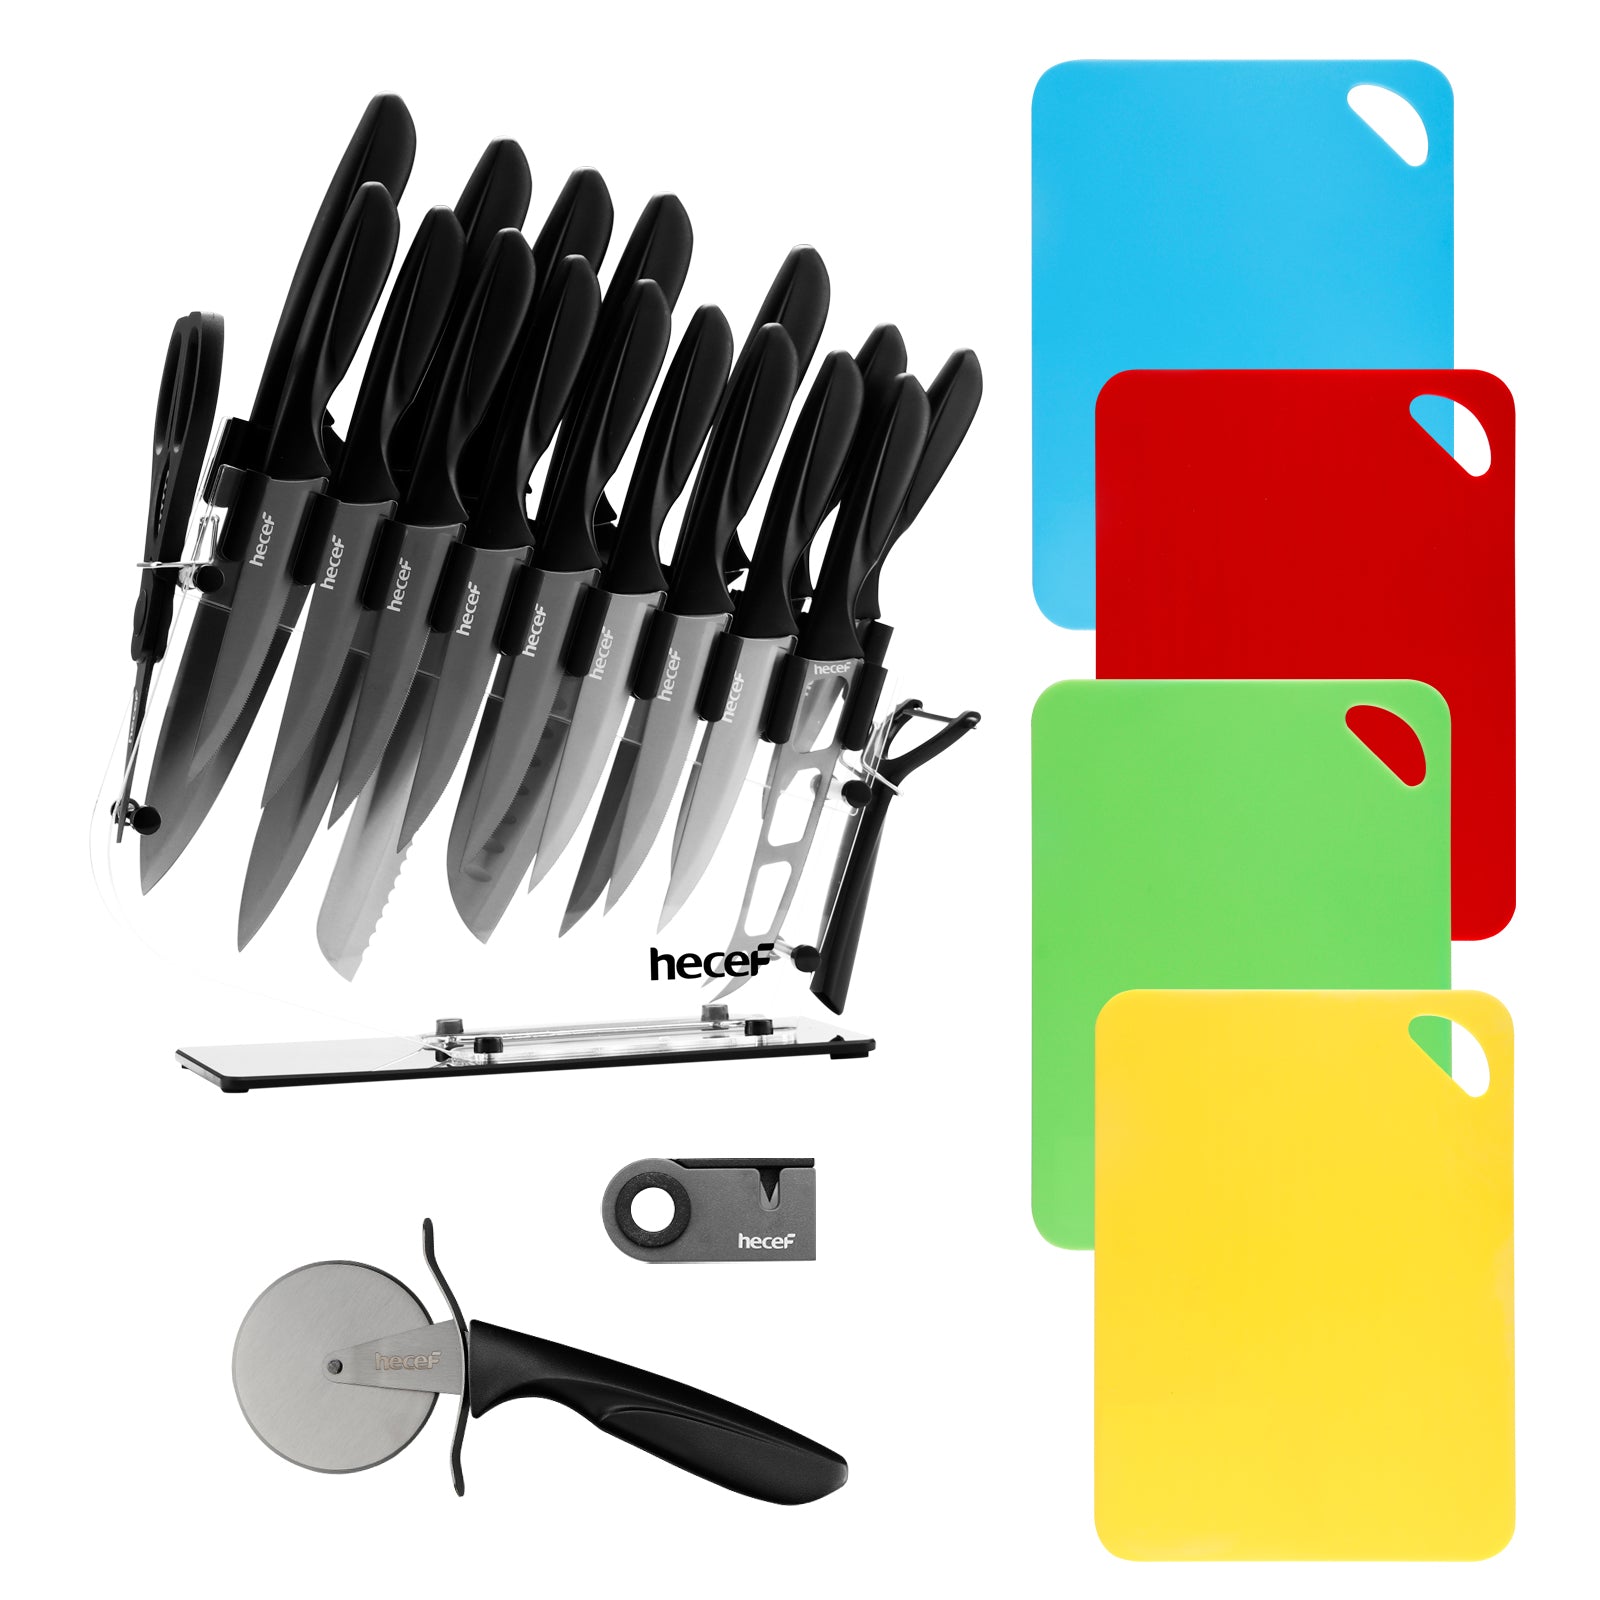 Hecef 25 PCS Kitchen Knife Set with Acrylic Stand Serrated Steak Knives  Cutting Boards, Titanium Plated Anti-Rusting Chef Knife